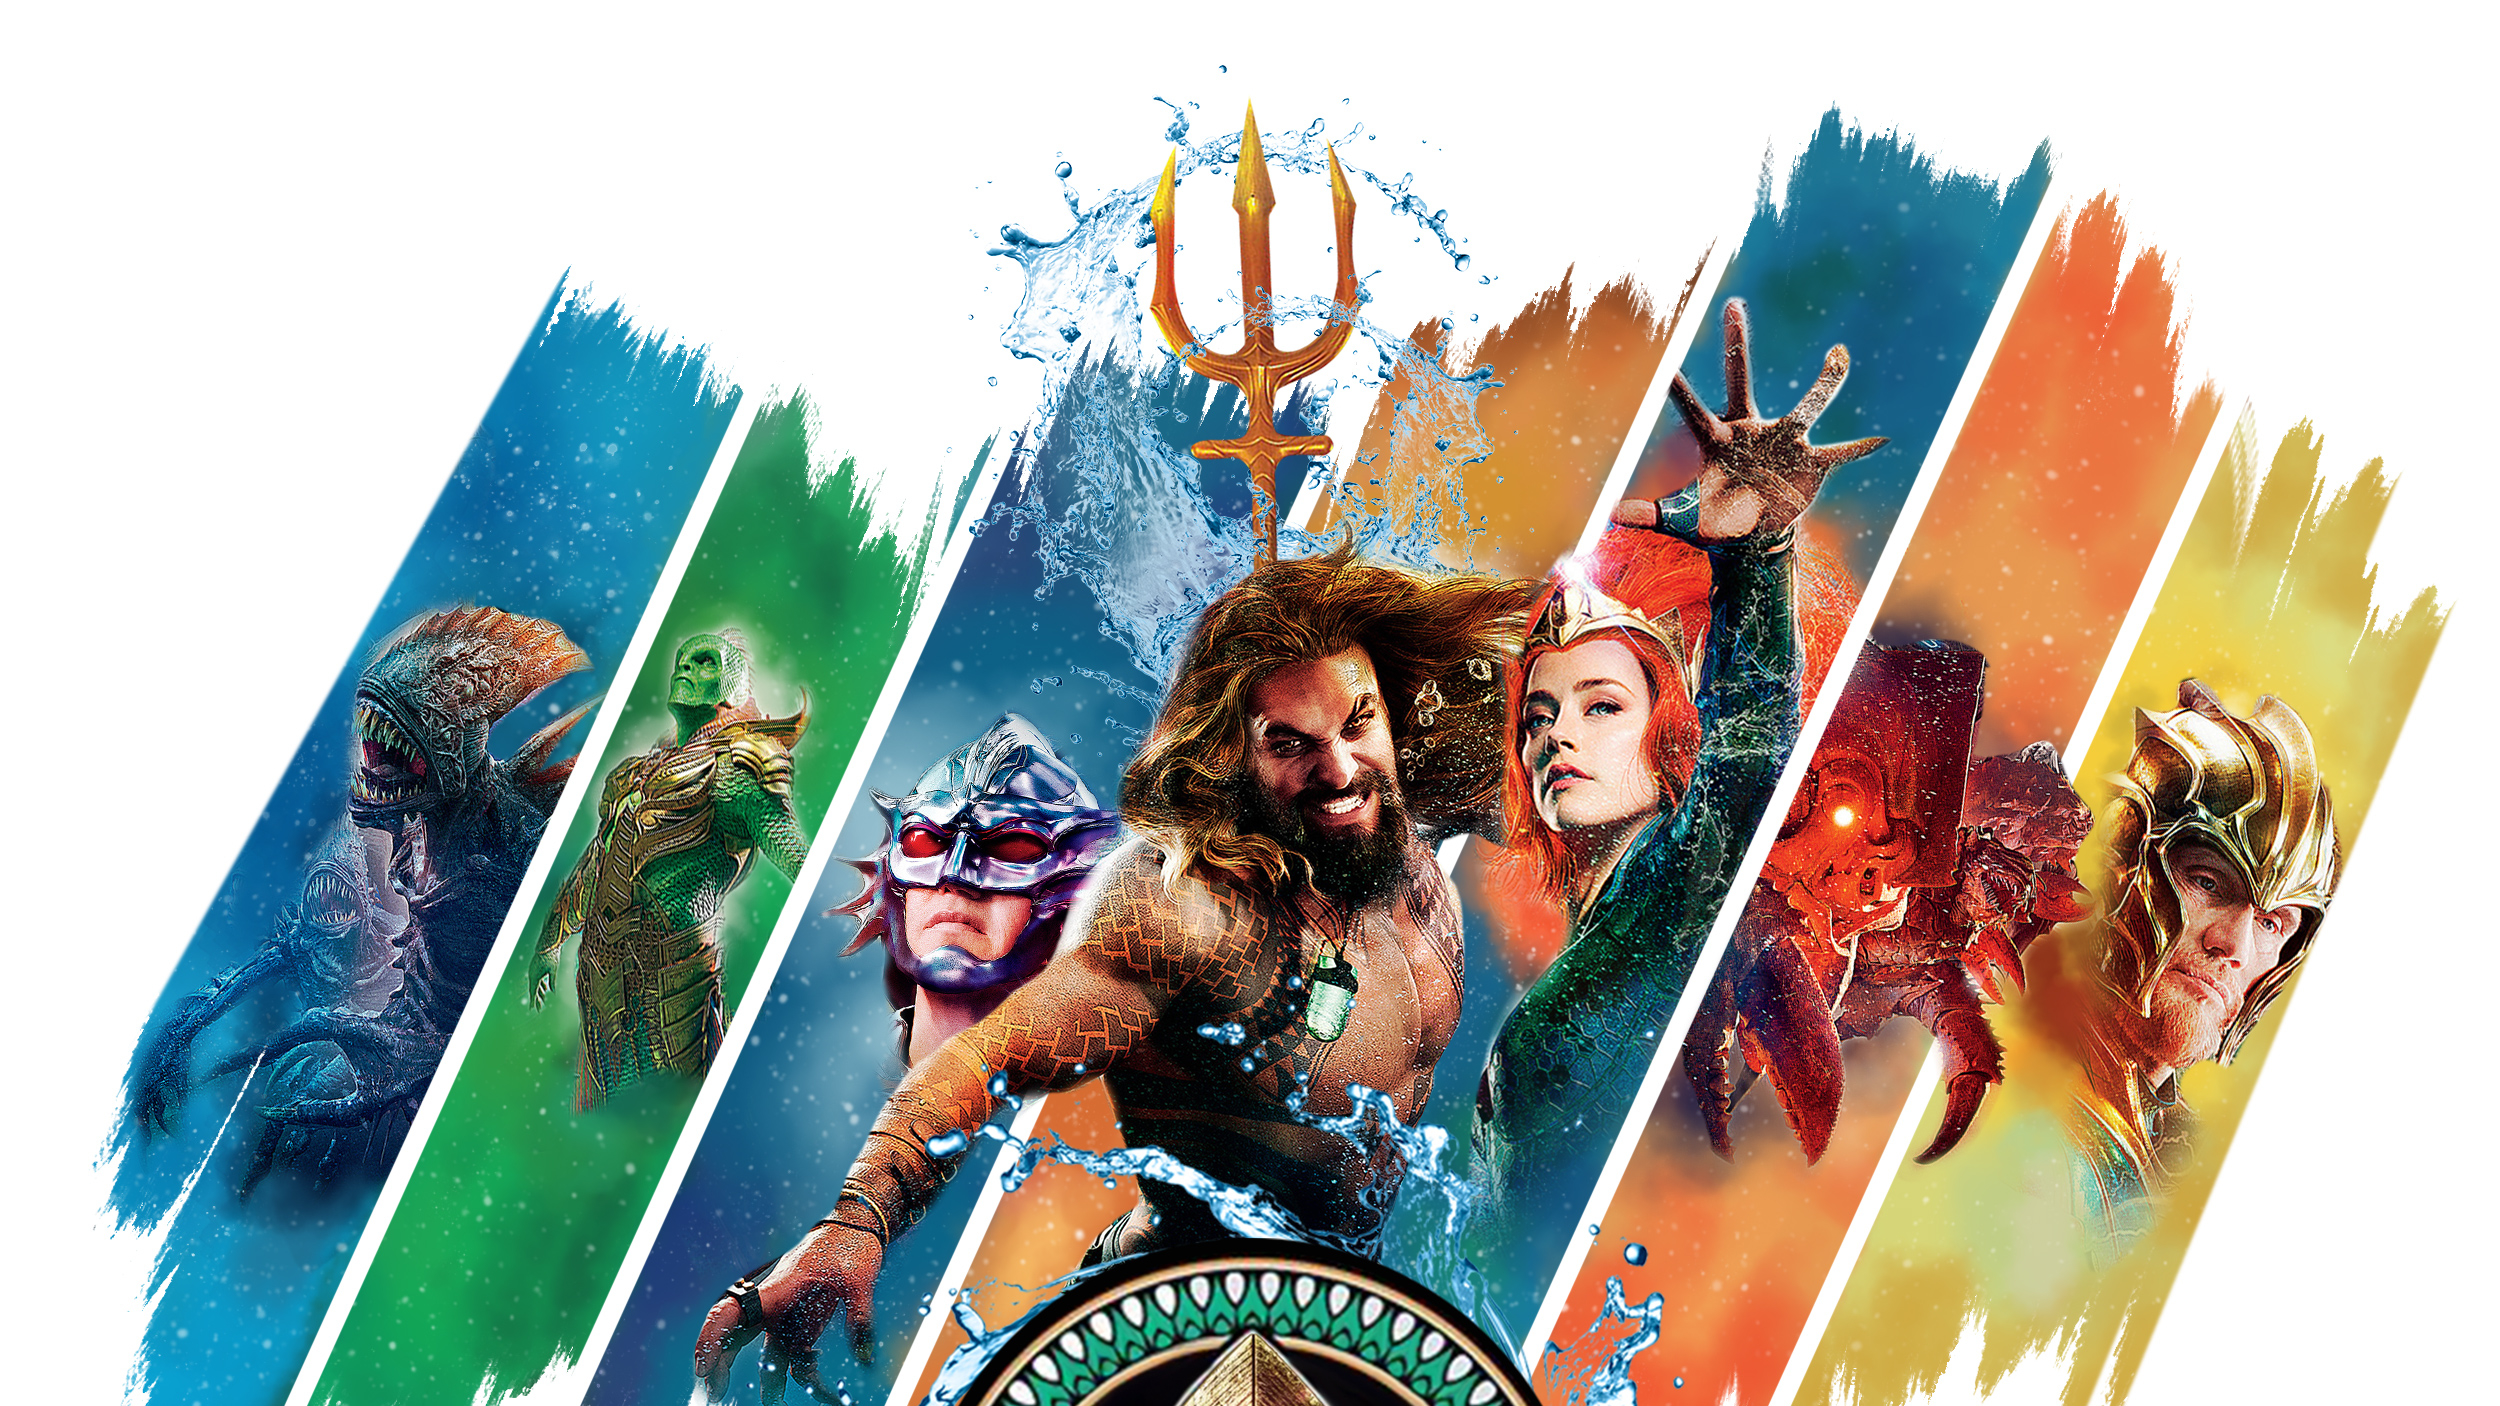 1440x2960 Aquaman Movie Team Samsung Galaxy Note 9 8 S9 S8 S8 Qhd Wallpaper Hd Superheroes 4k Wallpapers Images Photos And Background